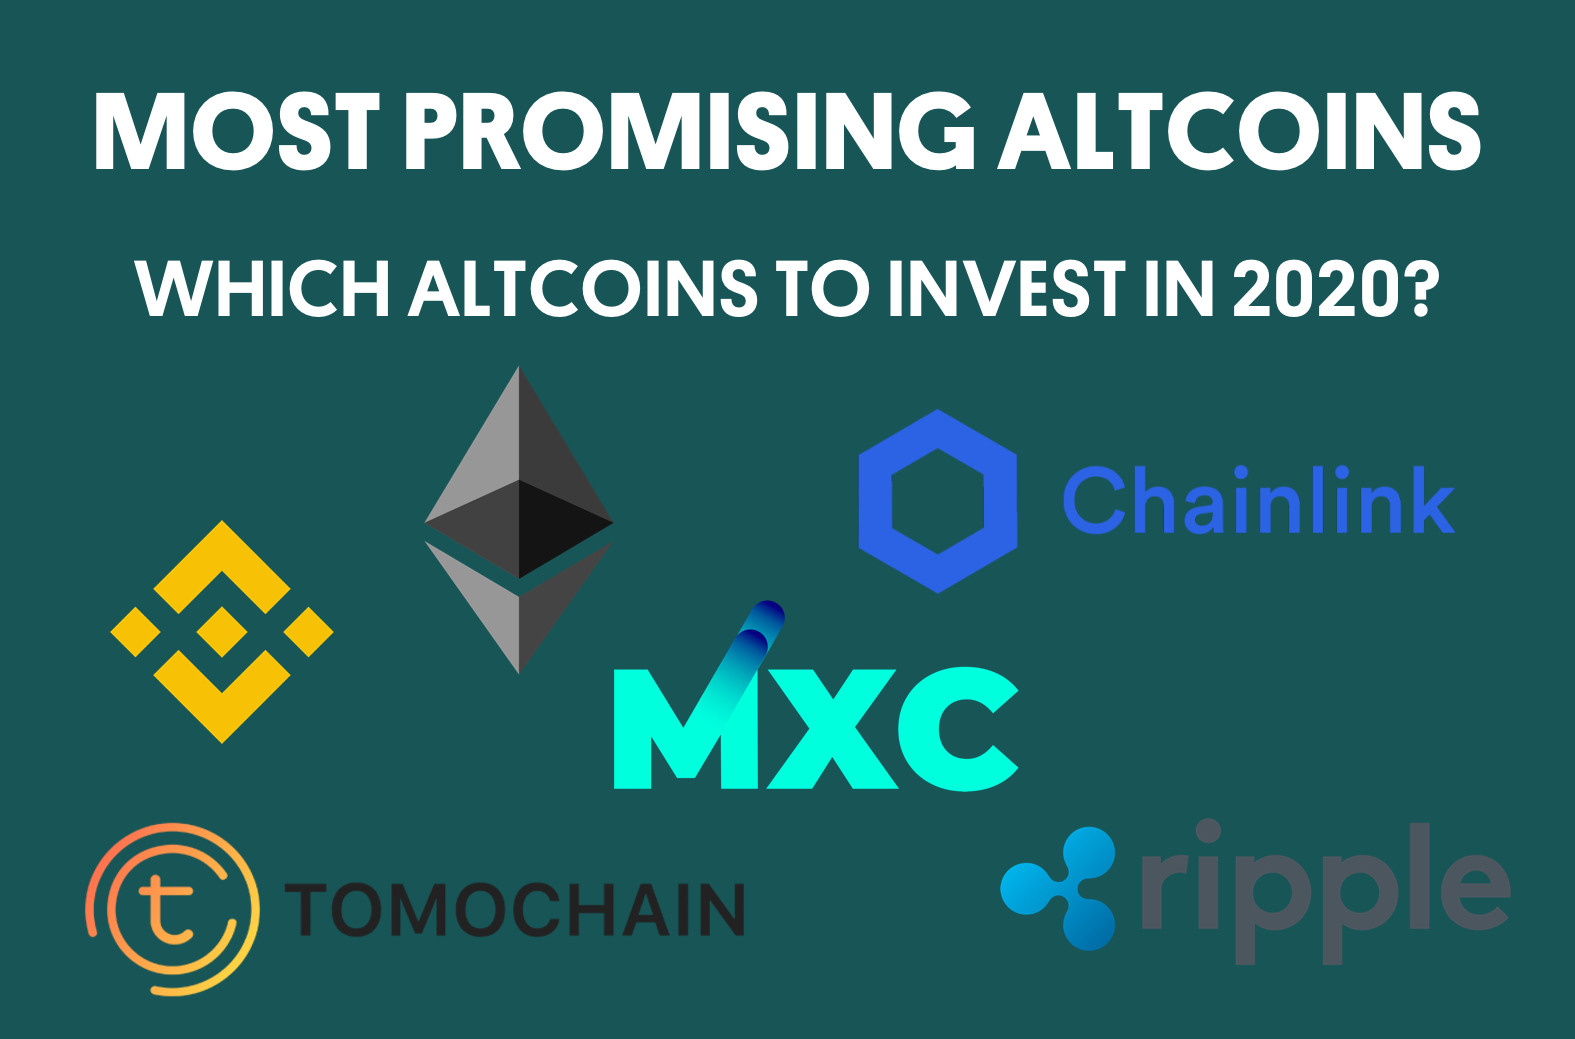 Most promising altcoins to invest in 2020?